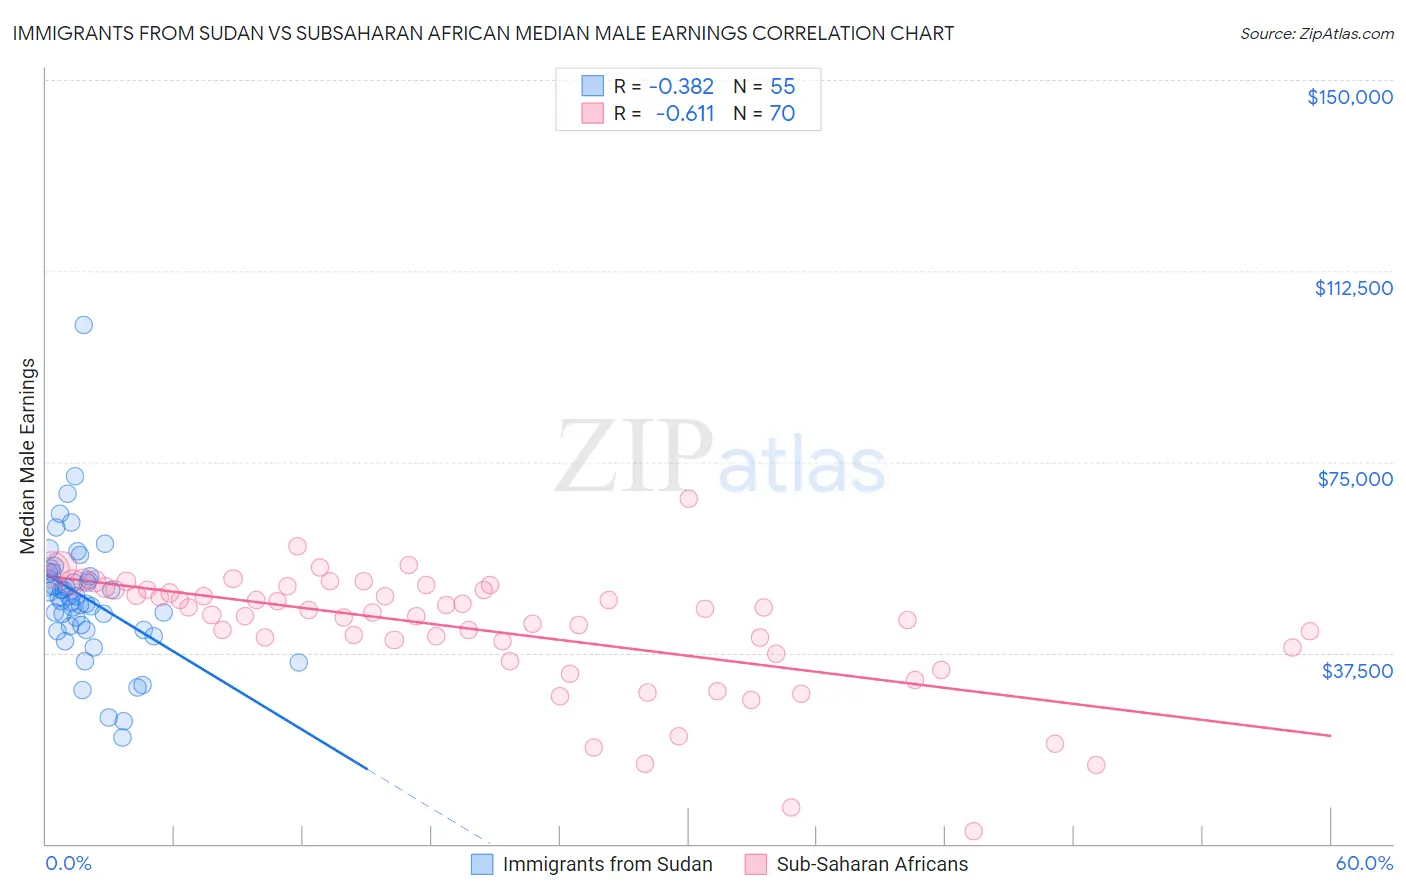 Immigrants from Sudan vs Subsaharan African Median Male Earnings